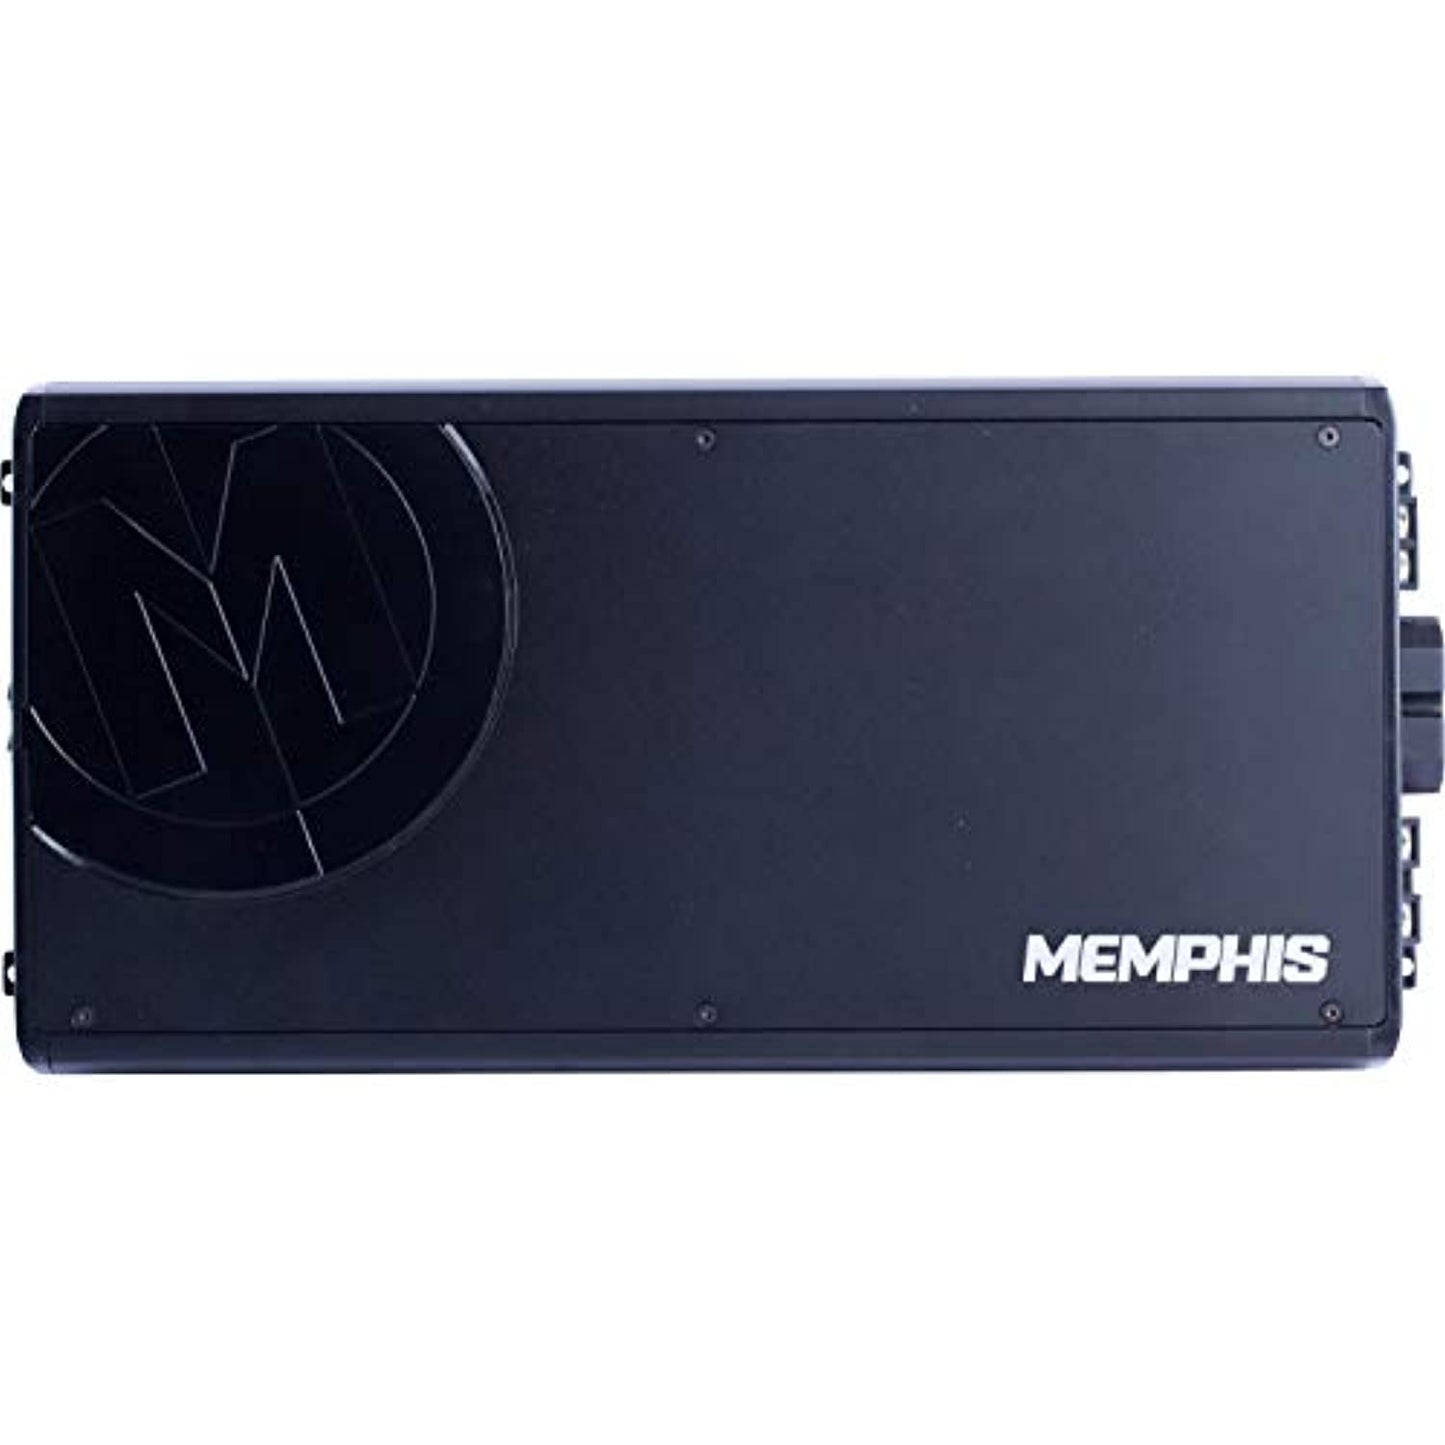 16-PRX1500.1 - Memphis Monoblock 1500W RMS 3000W Max Power Reference Amplifier by Memphis